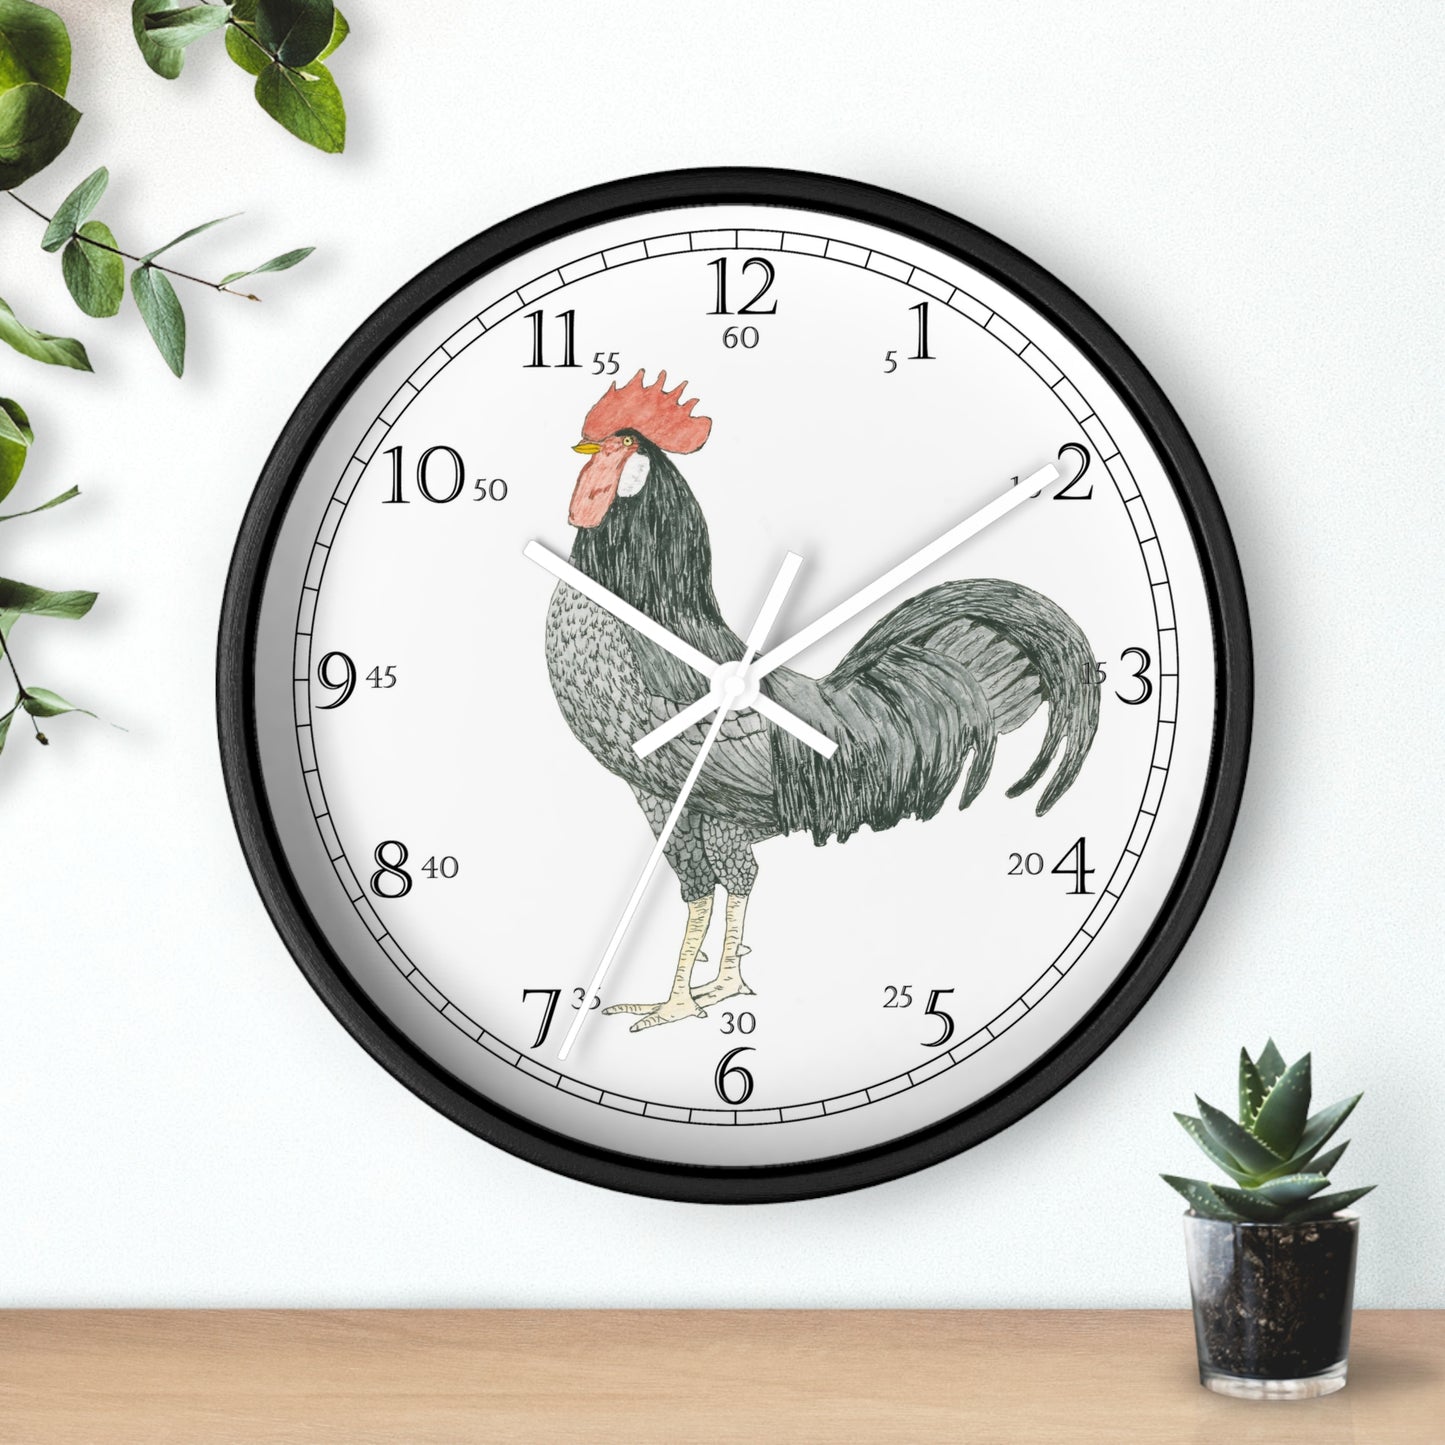 Adam Rooster English Numeral Clock